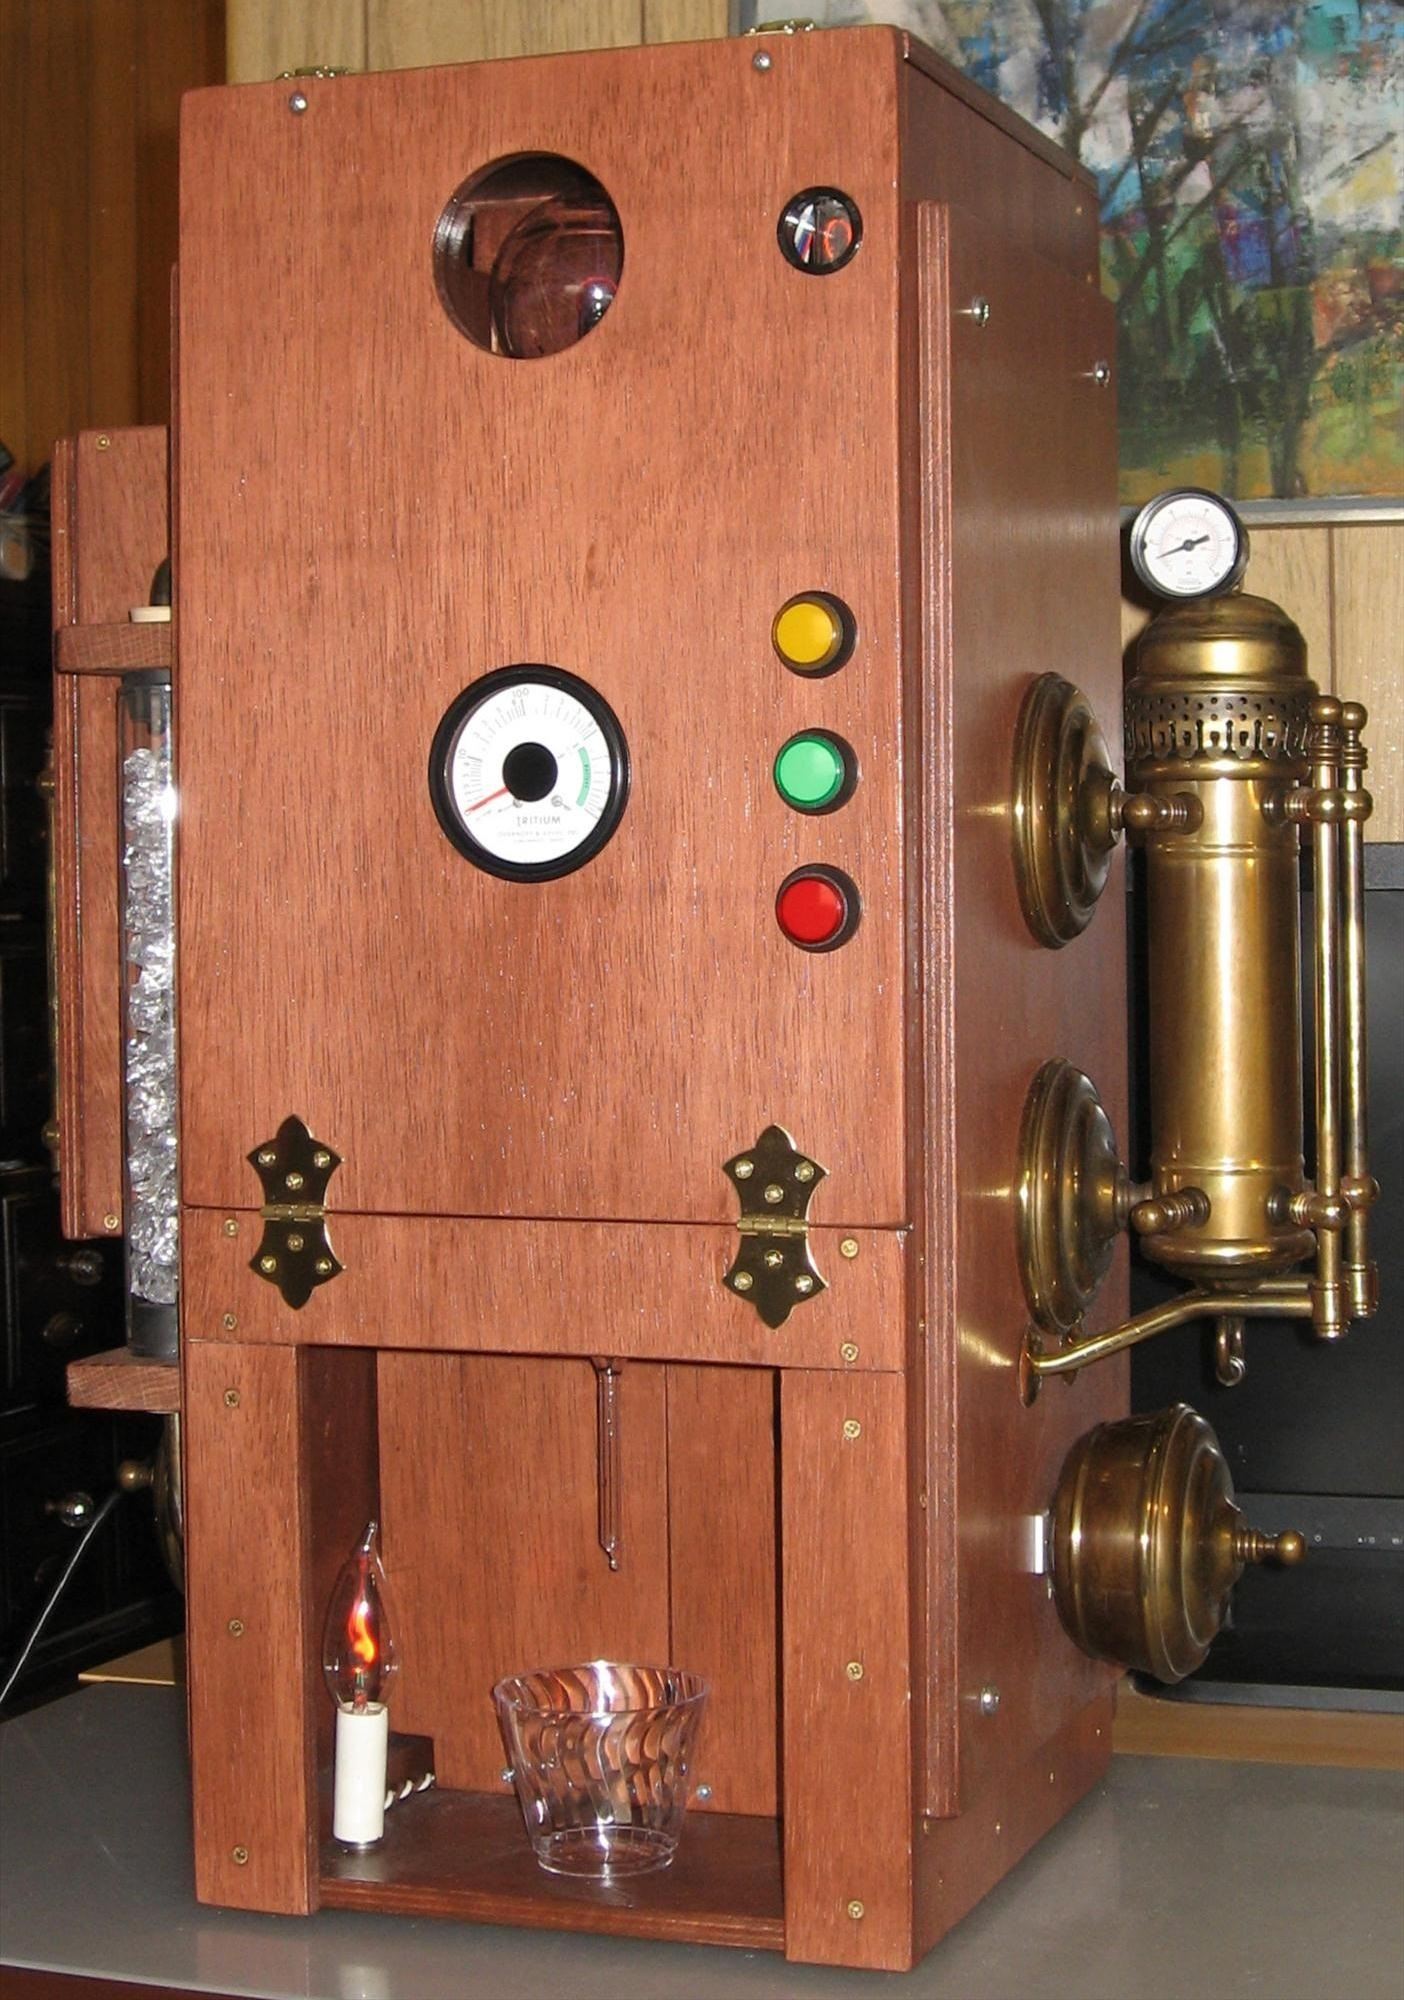 Steampunk Your Next Party with the Elixirator, a Truly Exquisite DIY Robotic Bartender